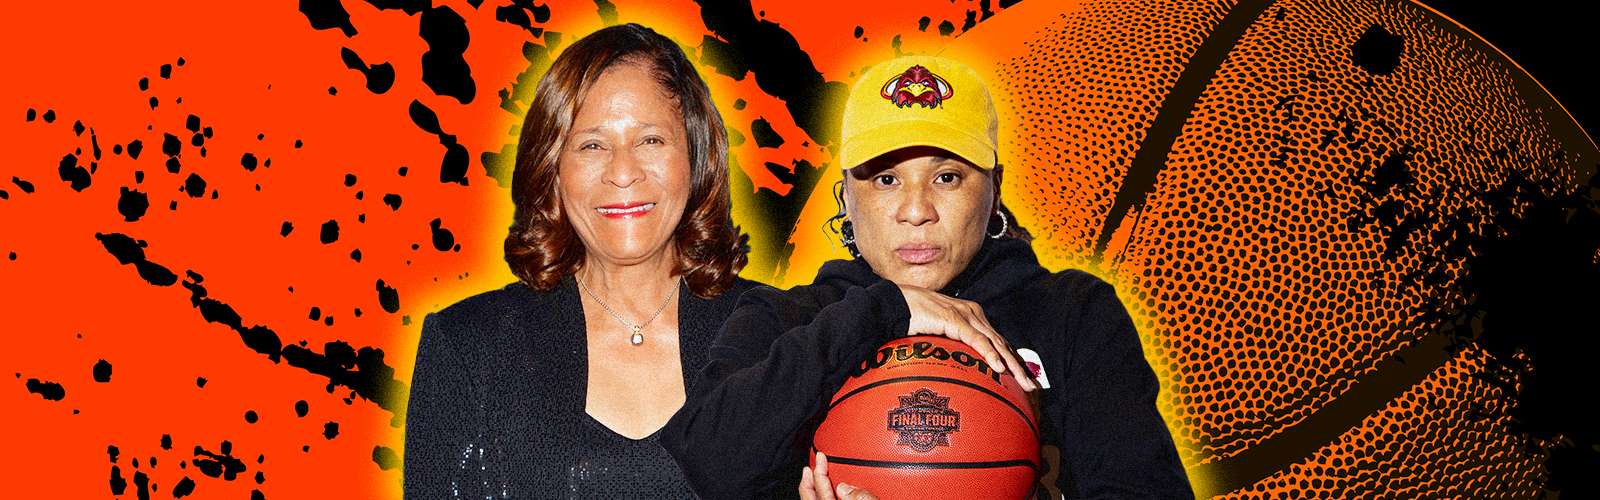 Dawn Staley Net Worth and Coaching Career